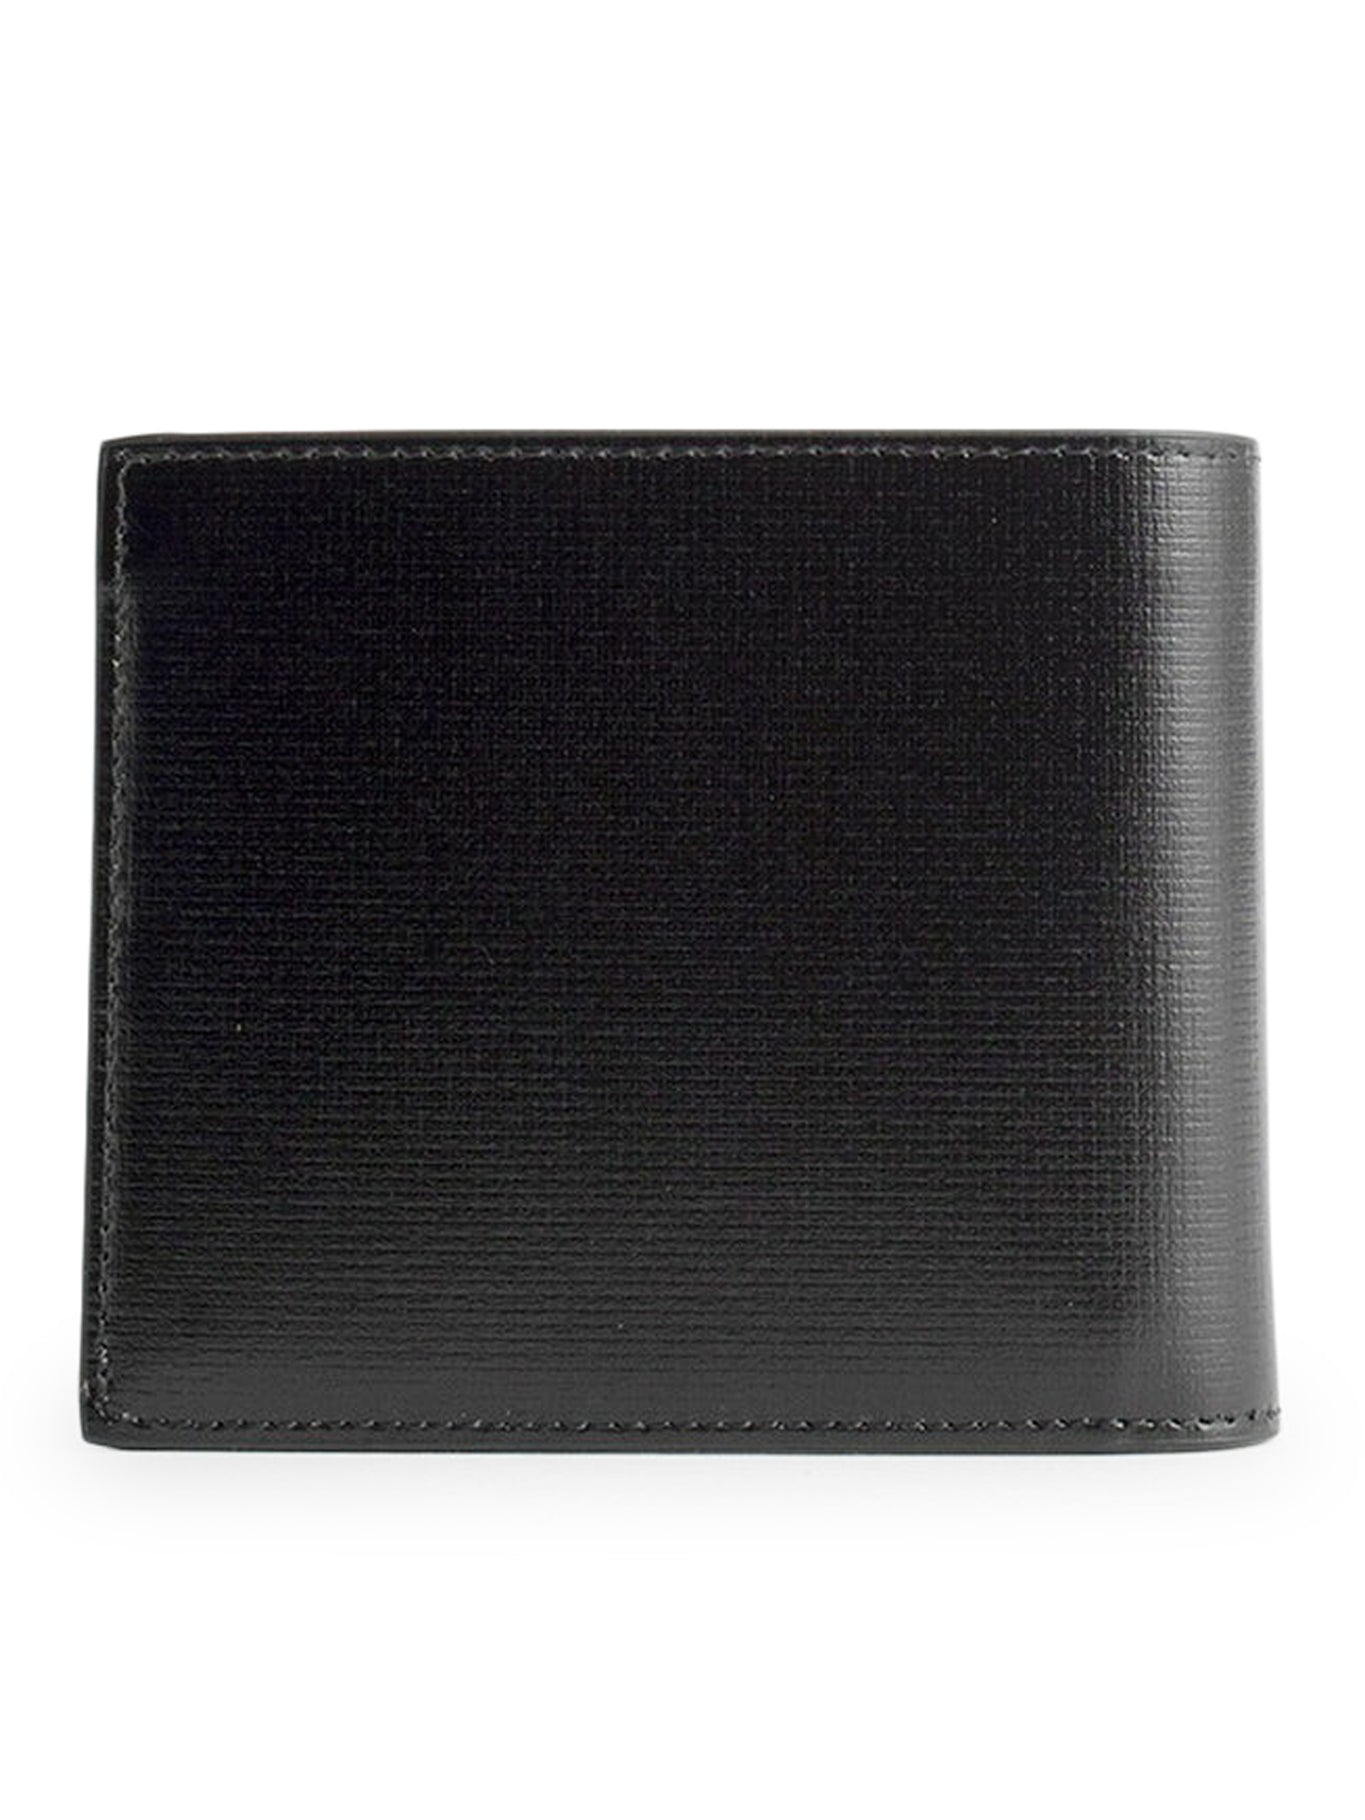 GIVENCHY wallet in 4G Classic leather